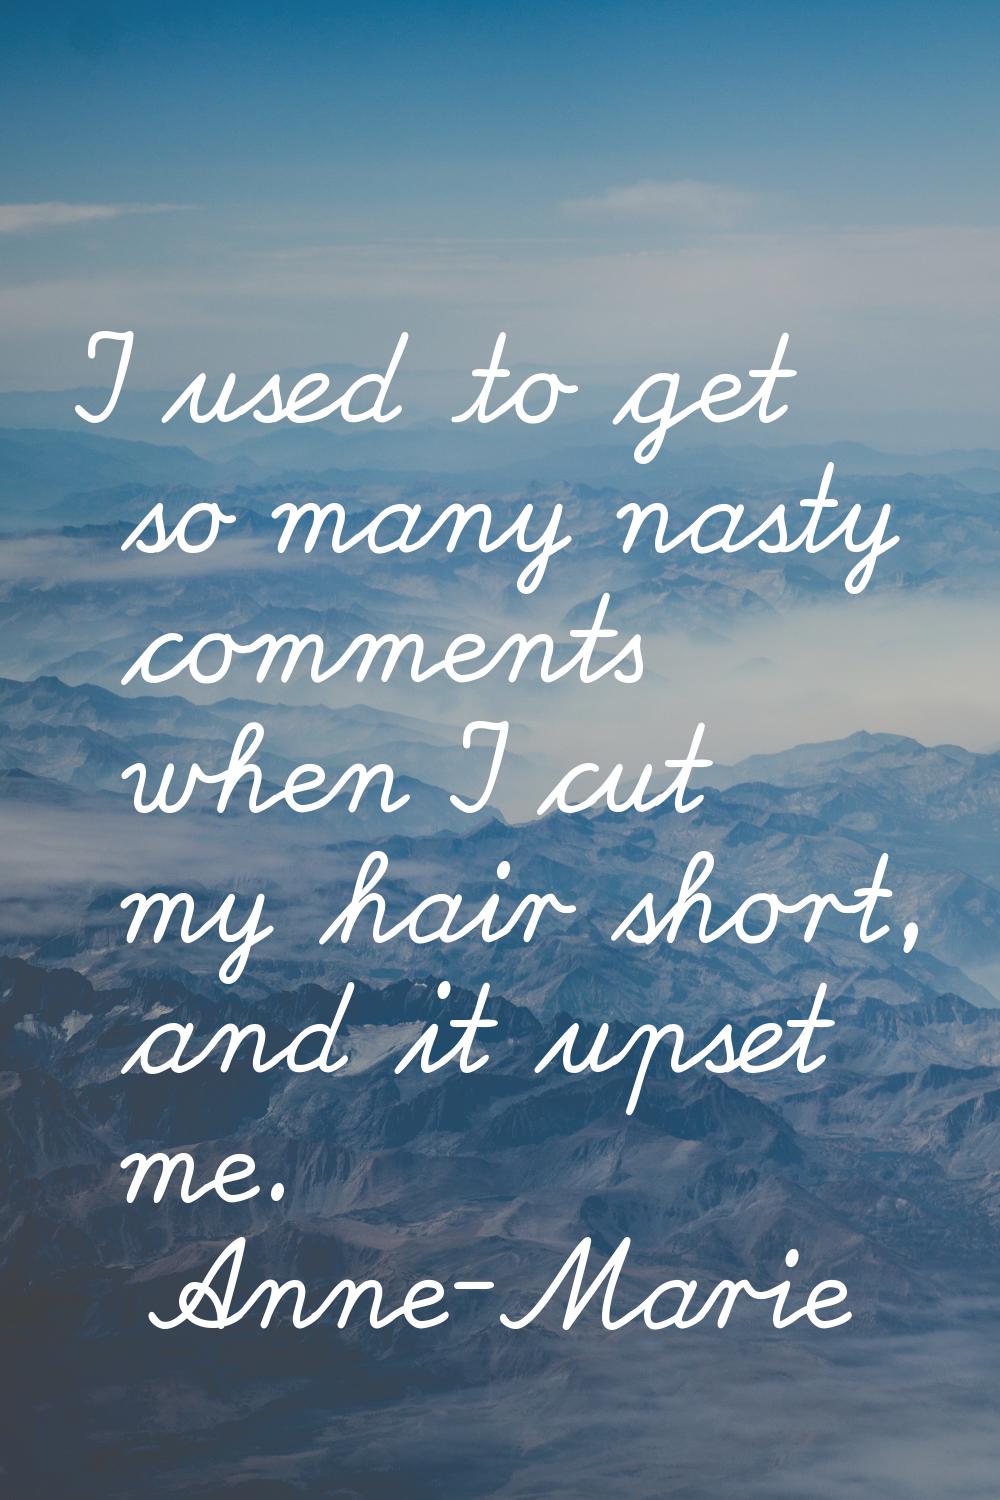 I used to get so many nasty comments when I cut my hair short, and it upset me.